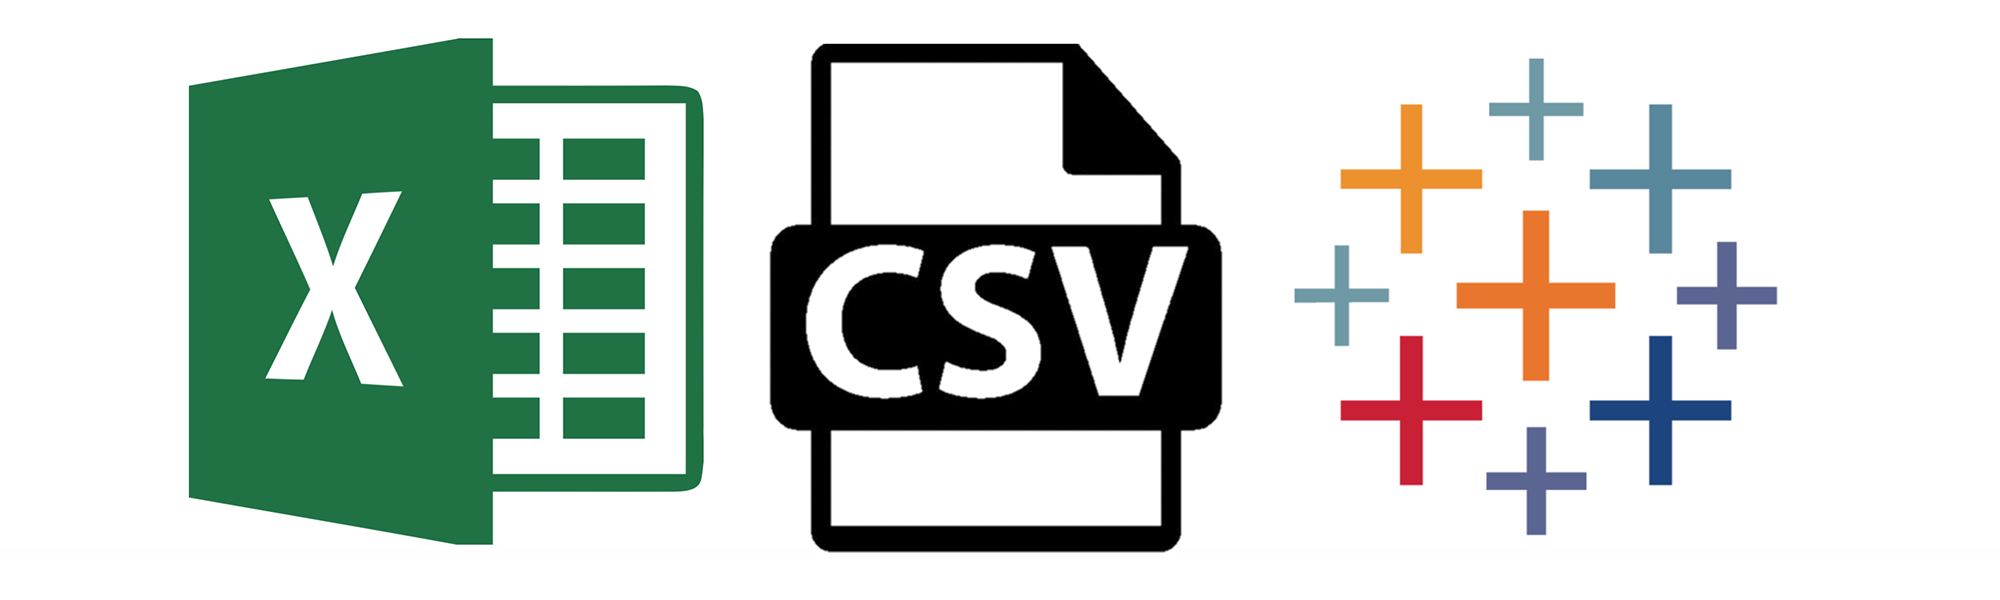 Excel to CSV for Global Well-Being